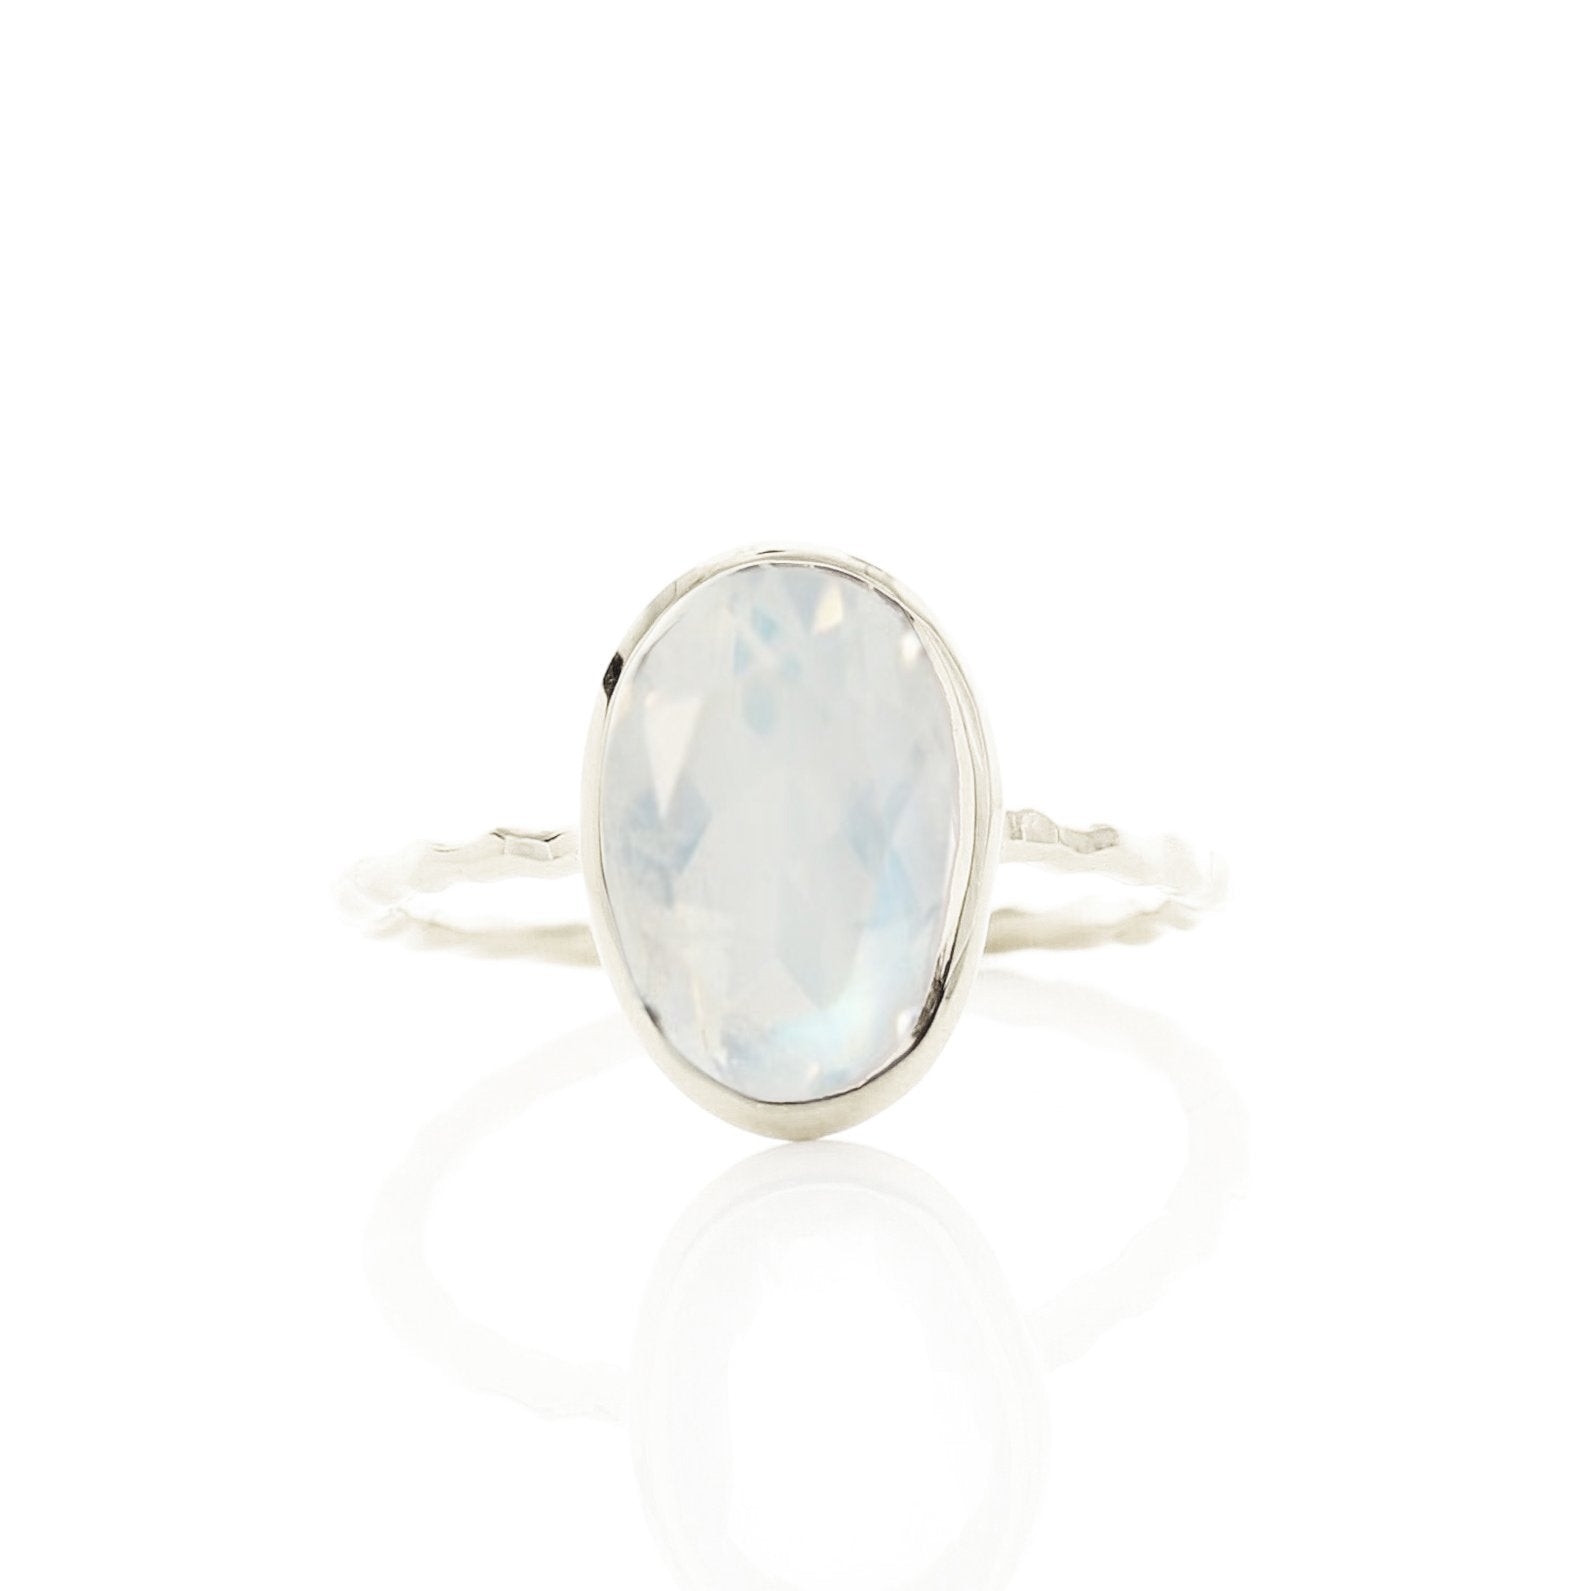 PROTECT OVAL RING - RAINBOW MOONSTONE & SILVER - SO PRETTY CARA COTTER